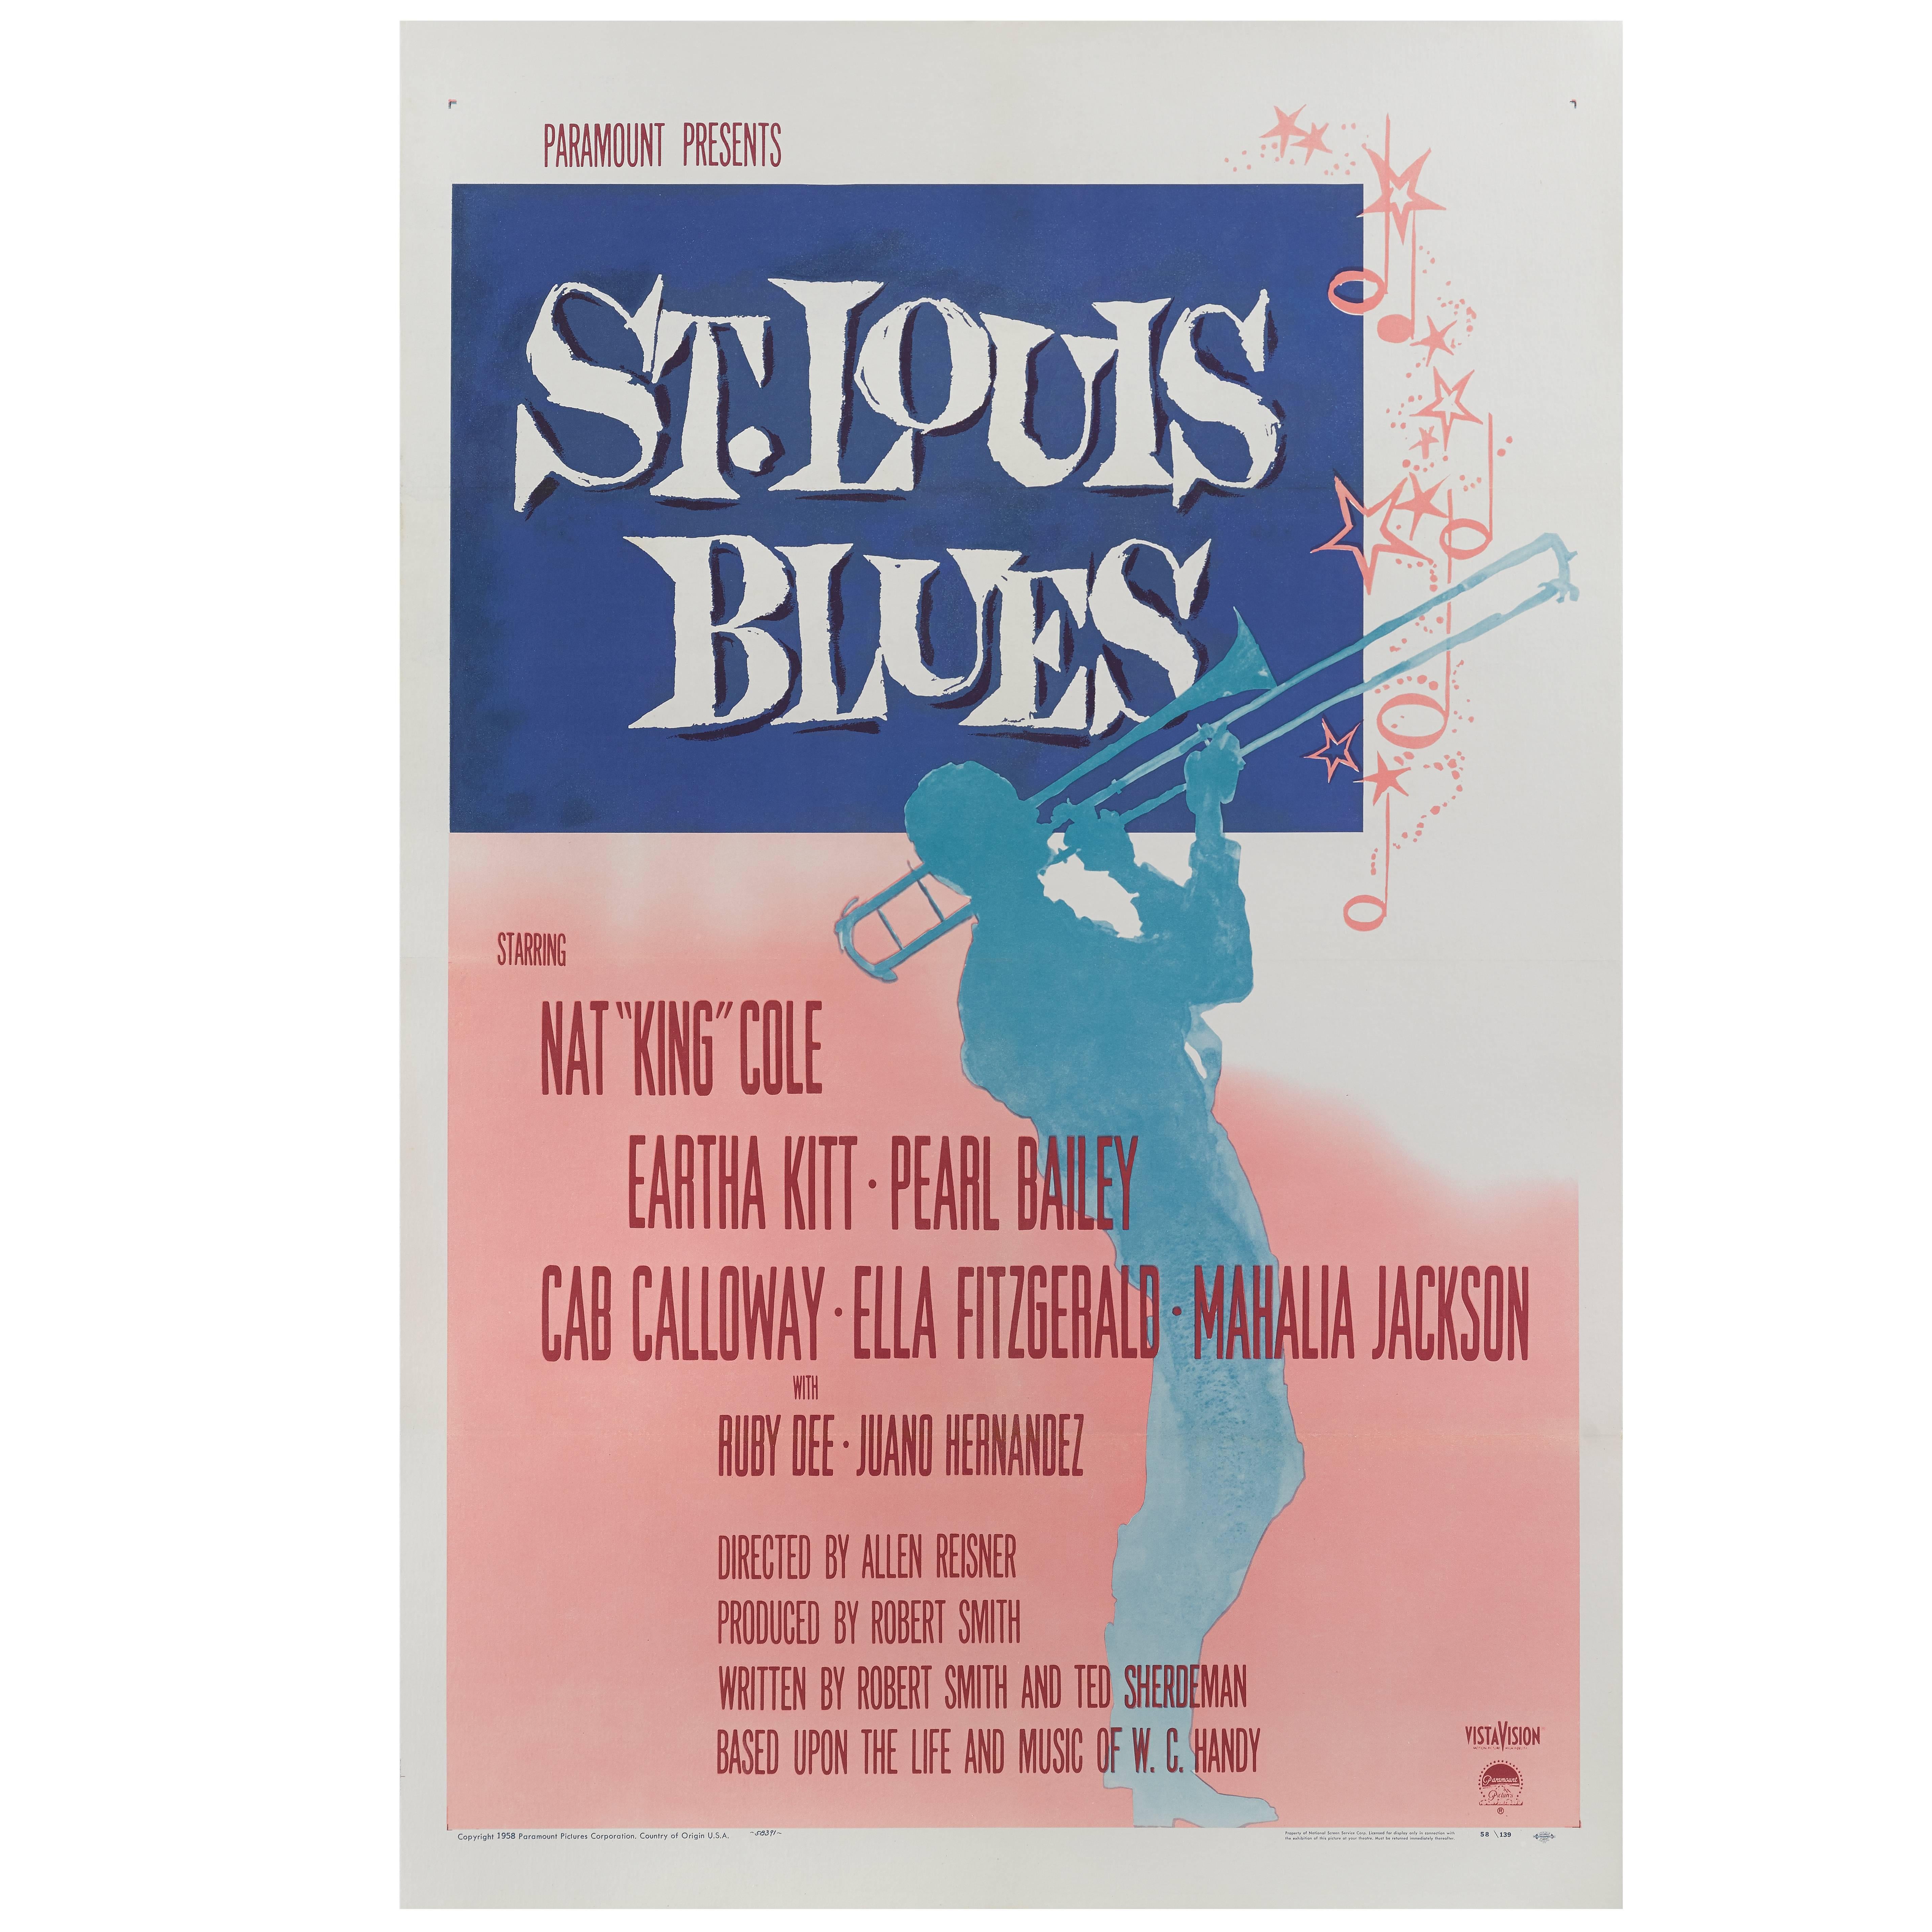 St. Louis Blues Movie Poster For Sale